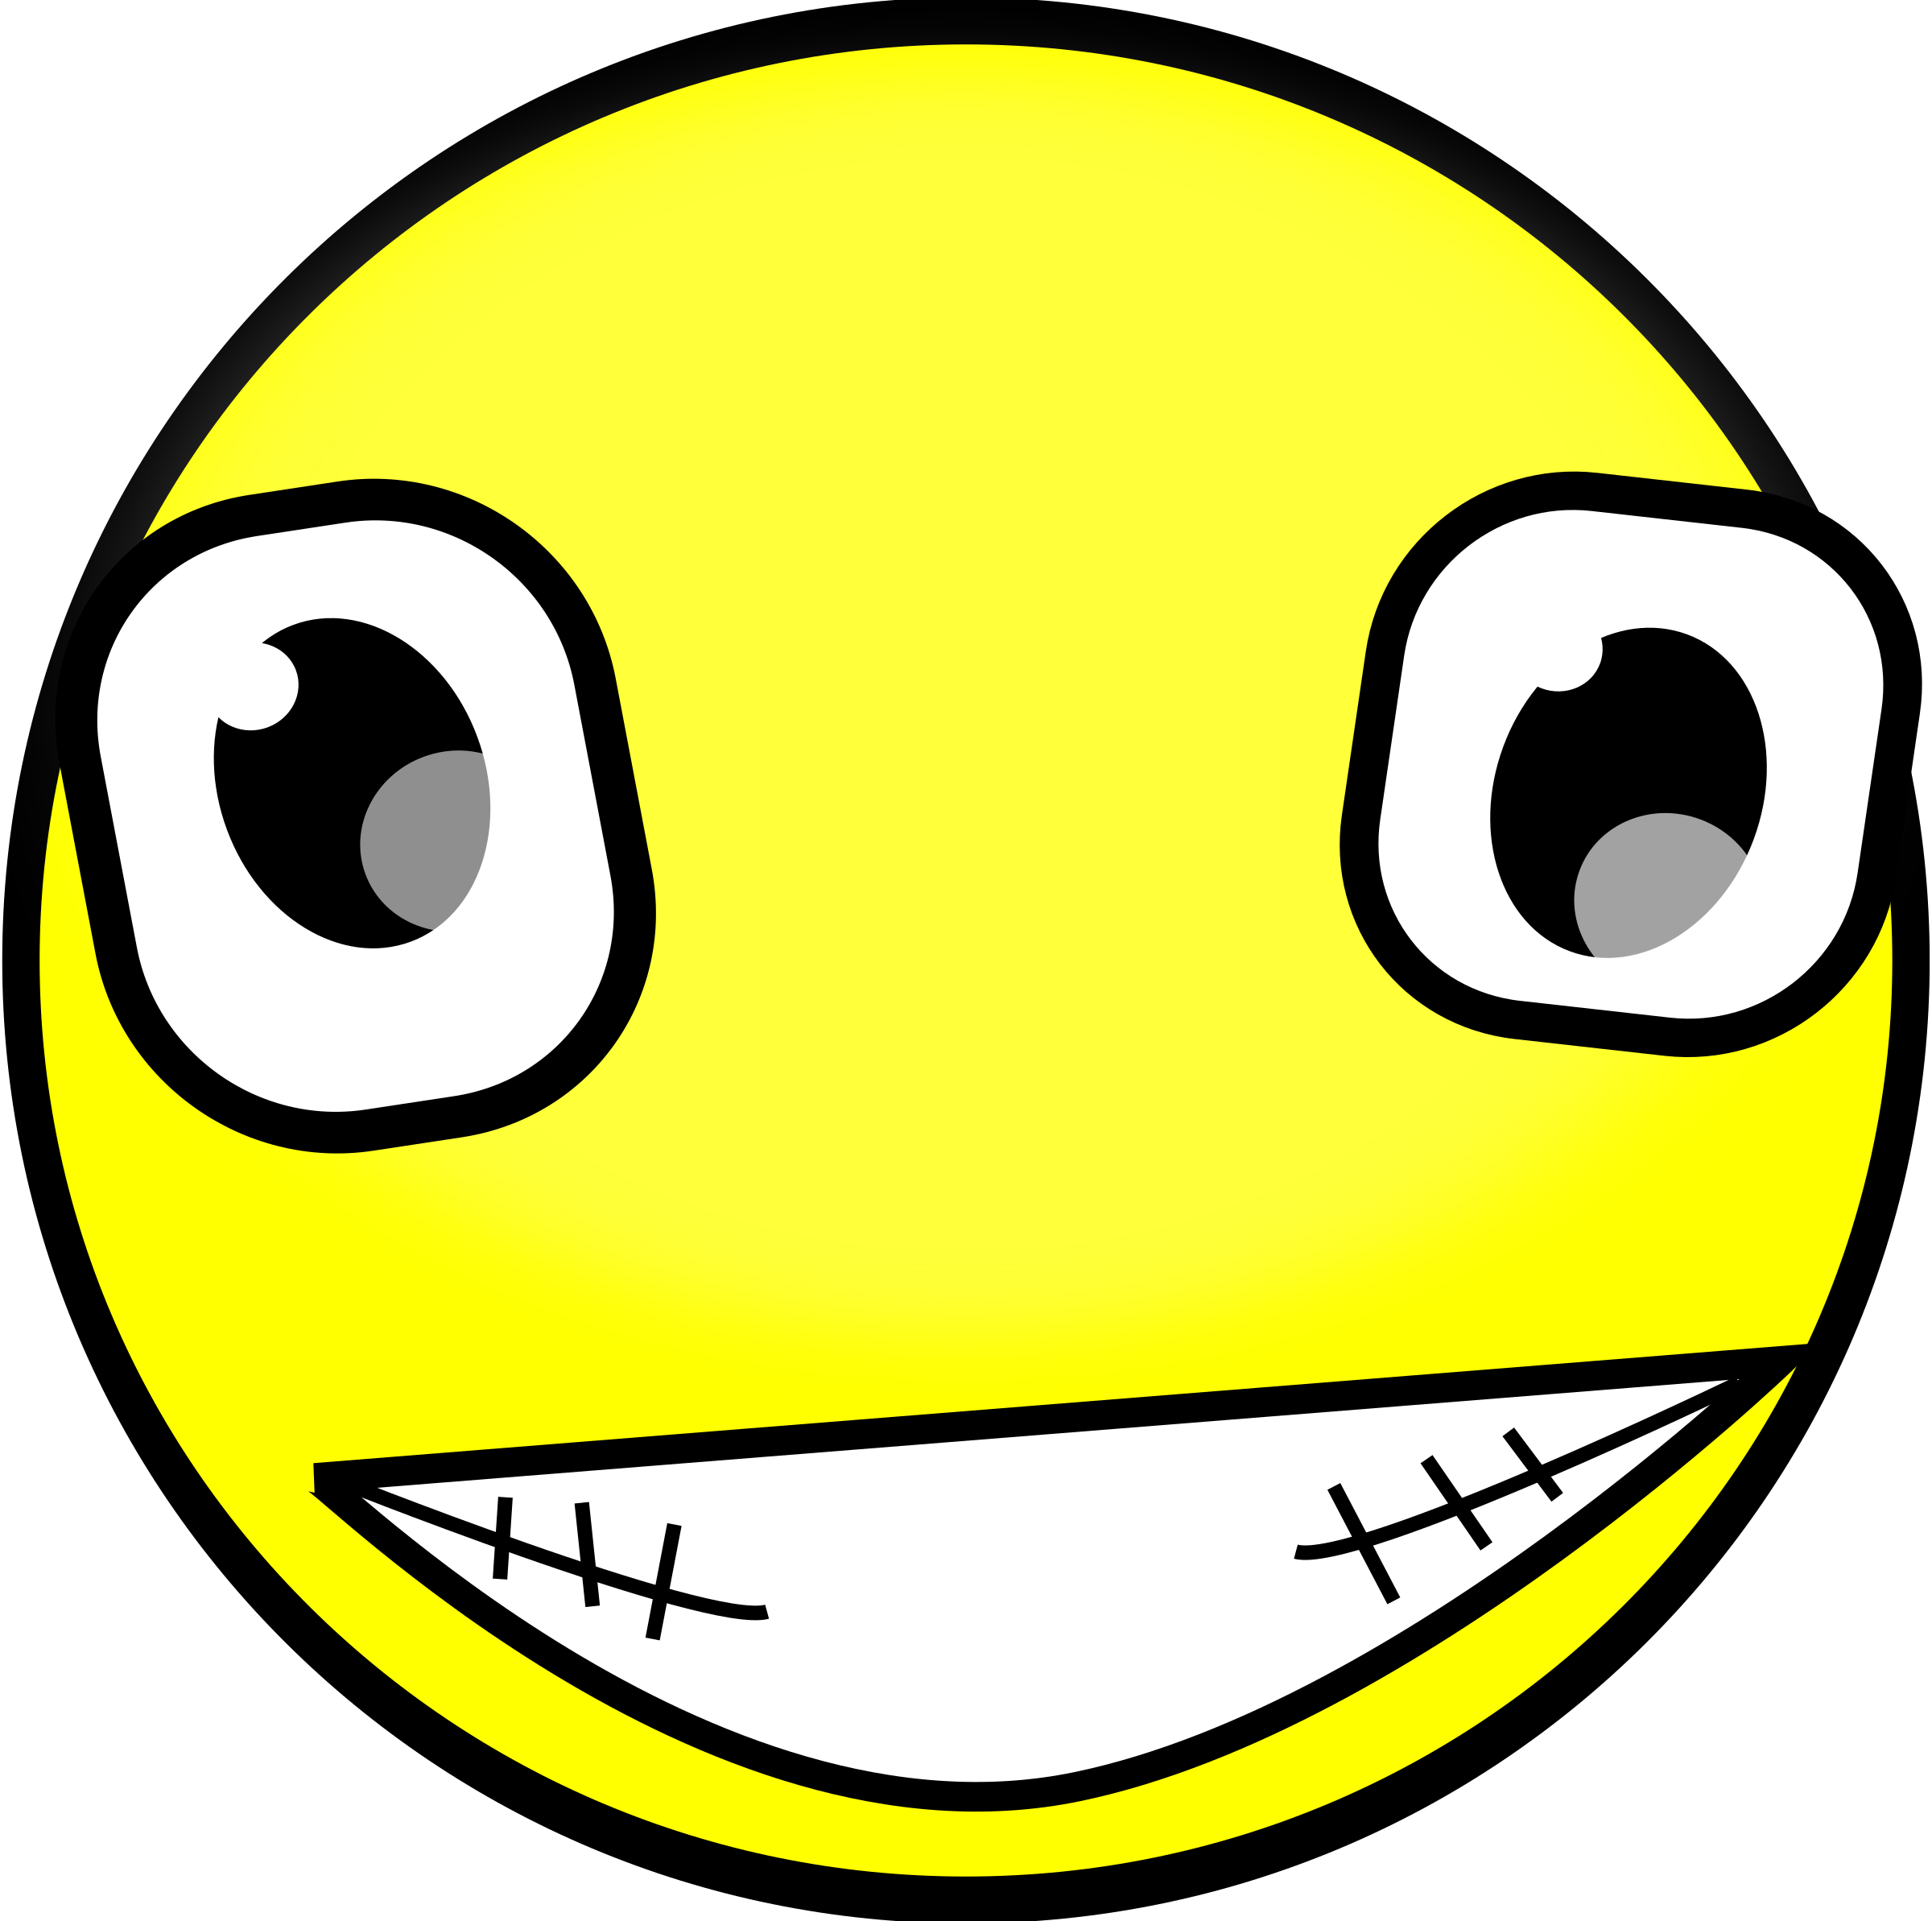 All Images From Collection - Smiley Crazy Face 1 25 Magnet Emoticon (2400x2386)